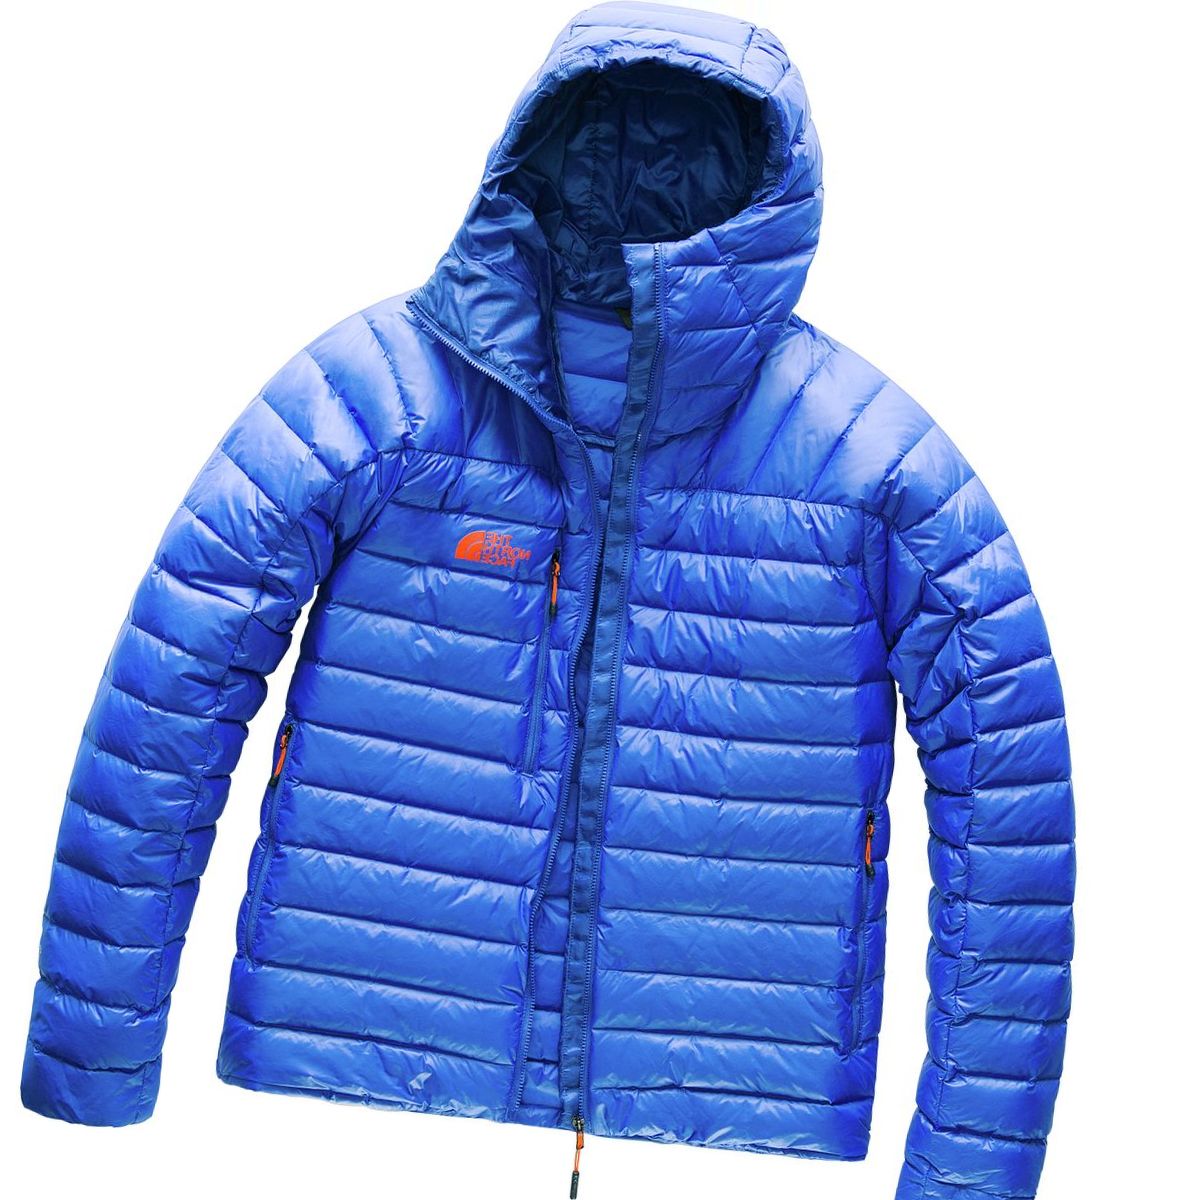 The North Face Morph Hooded Down Jacket - Men's